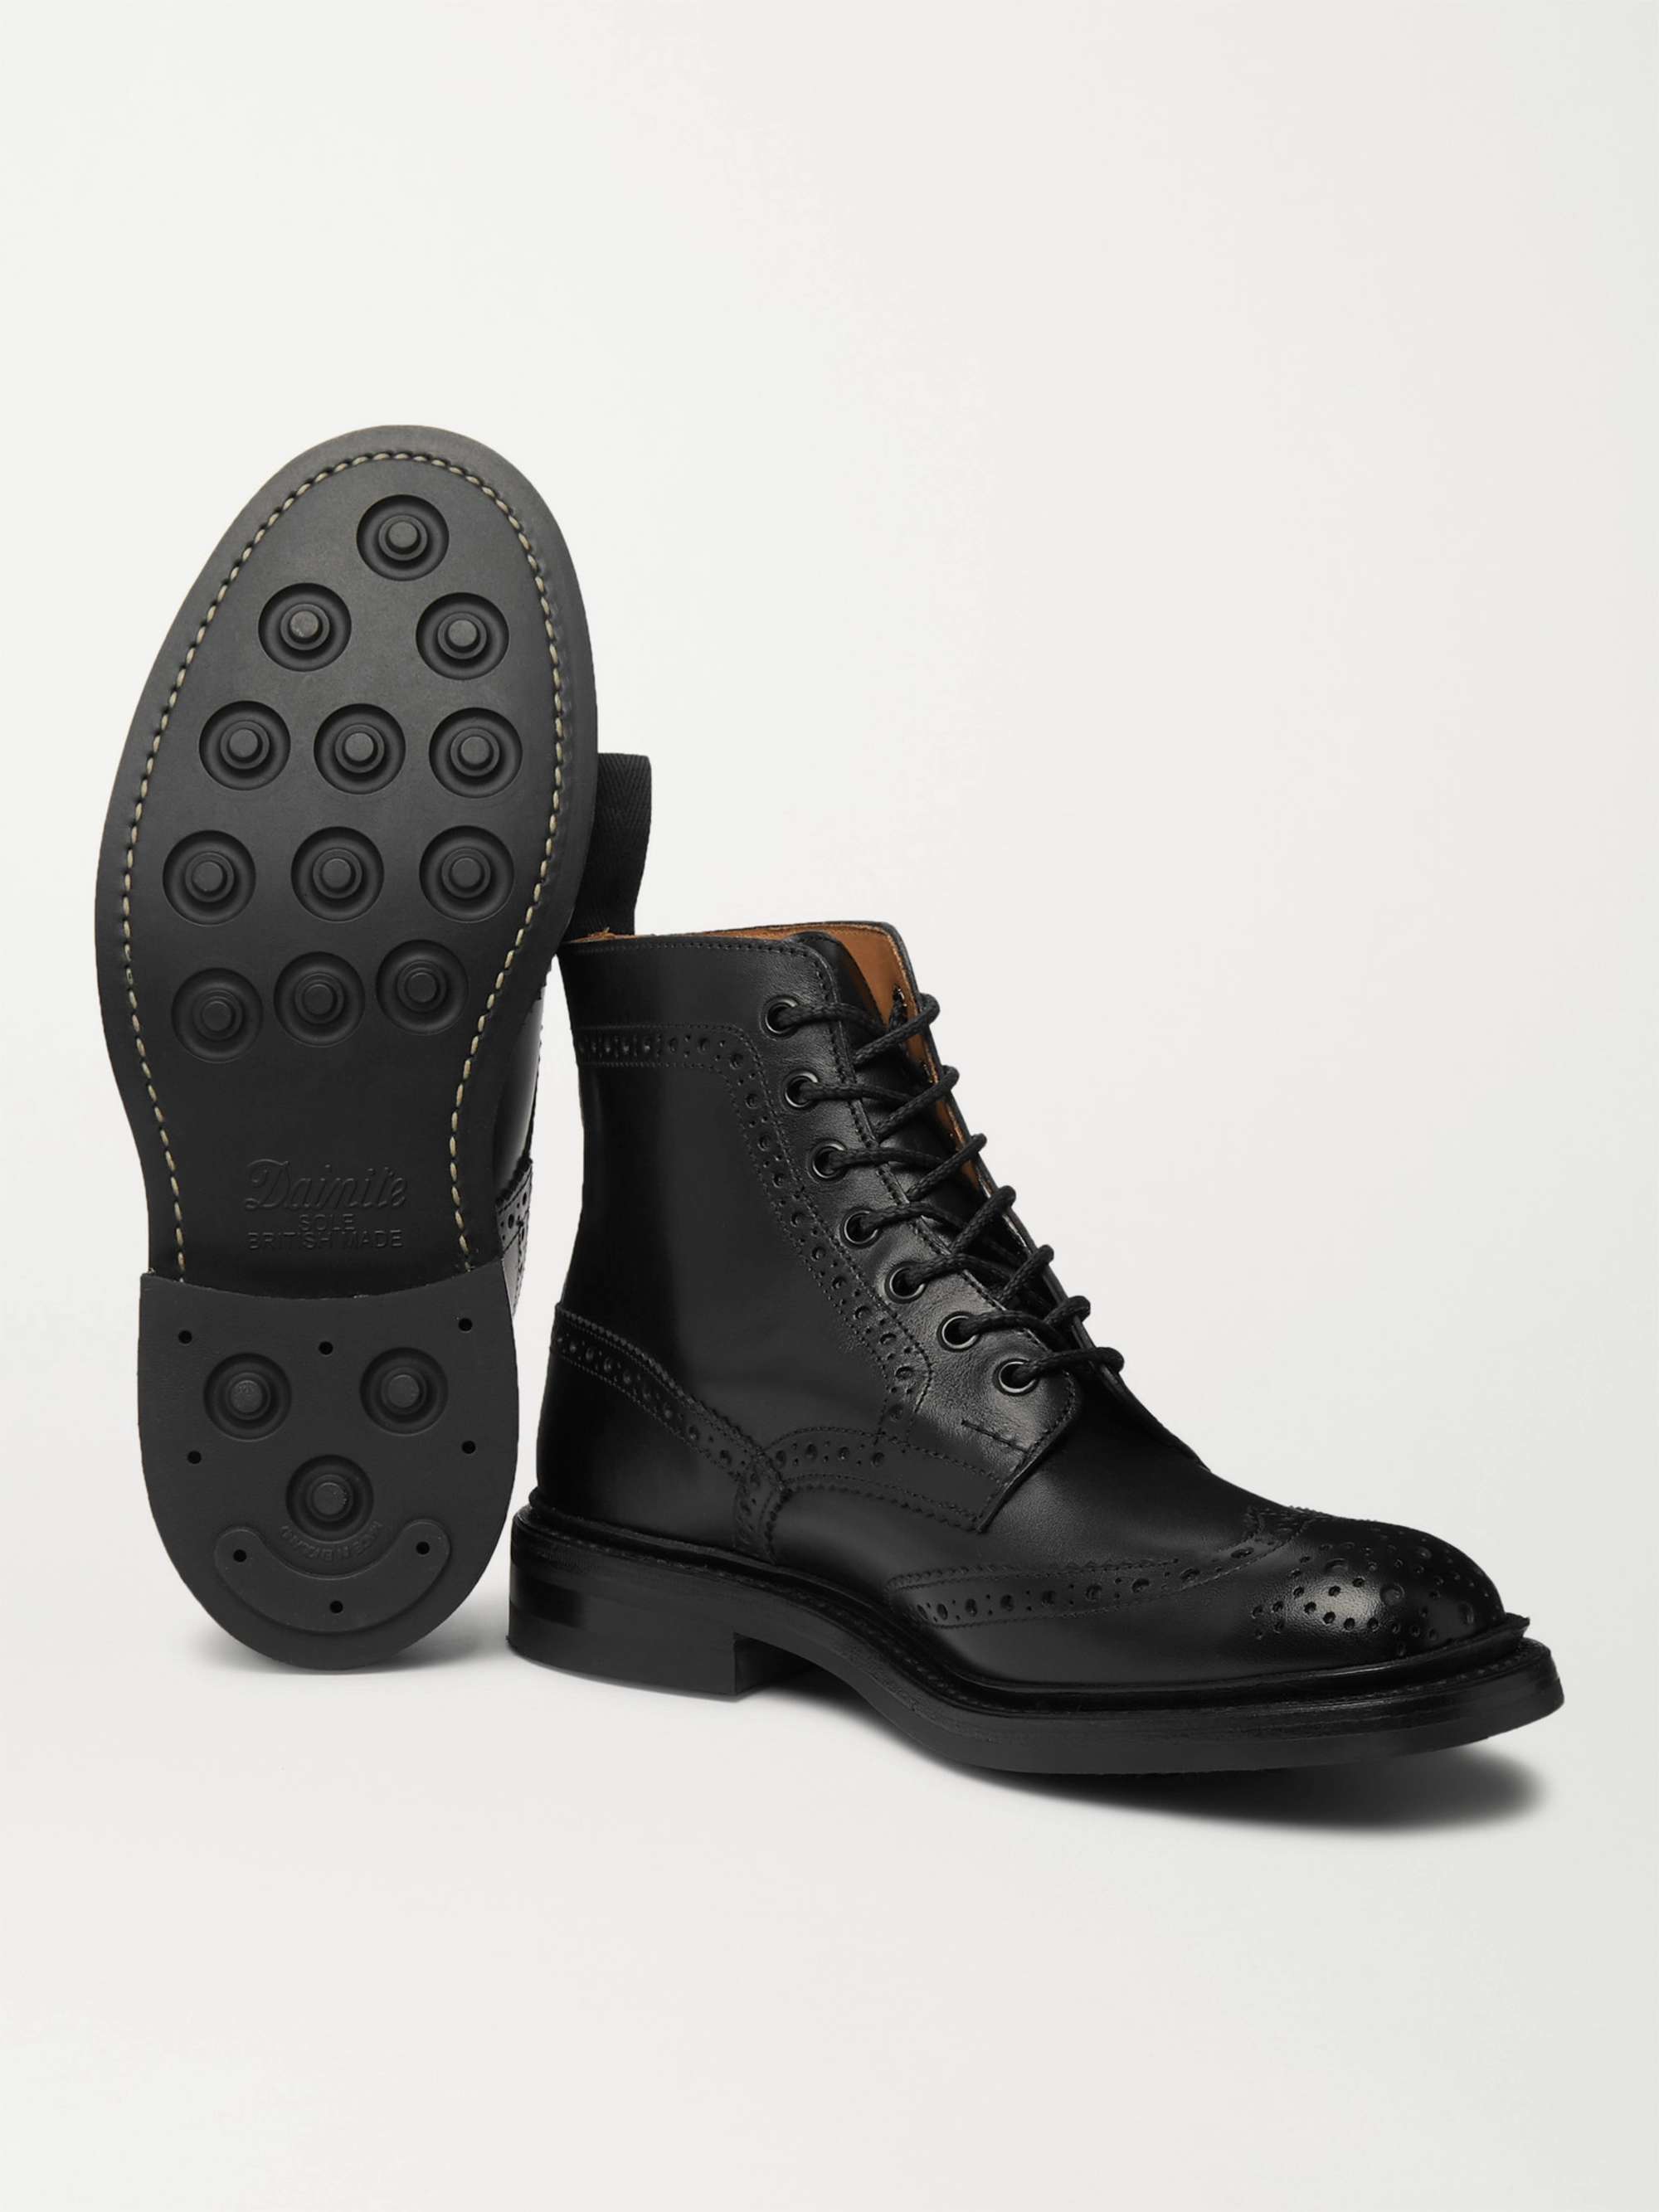 TRICKER'S Stow Full-Grain Leather Brogue Boots | MR PORTER